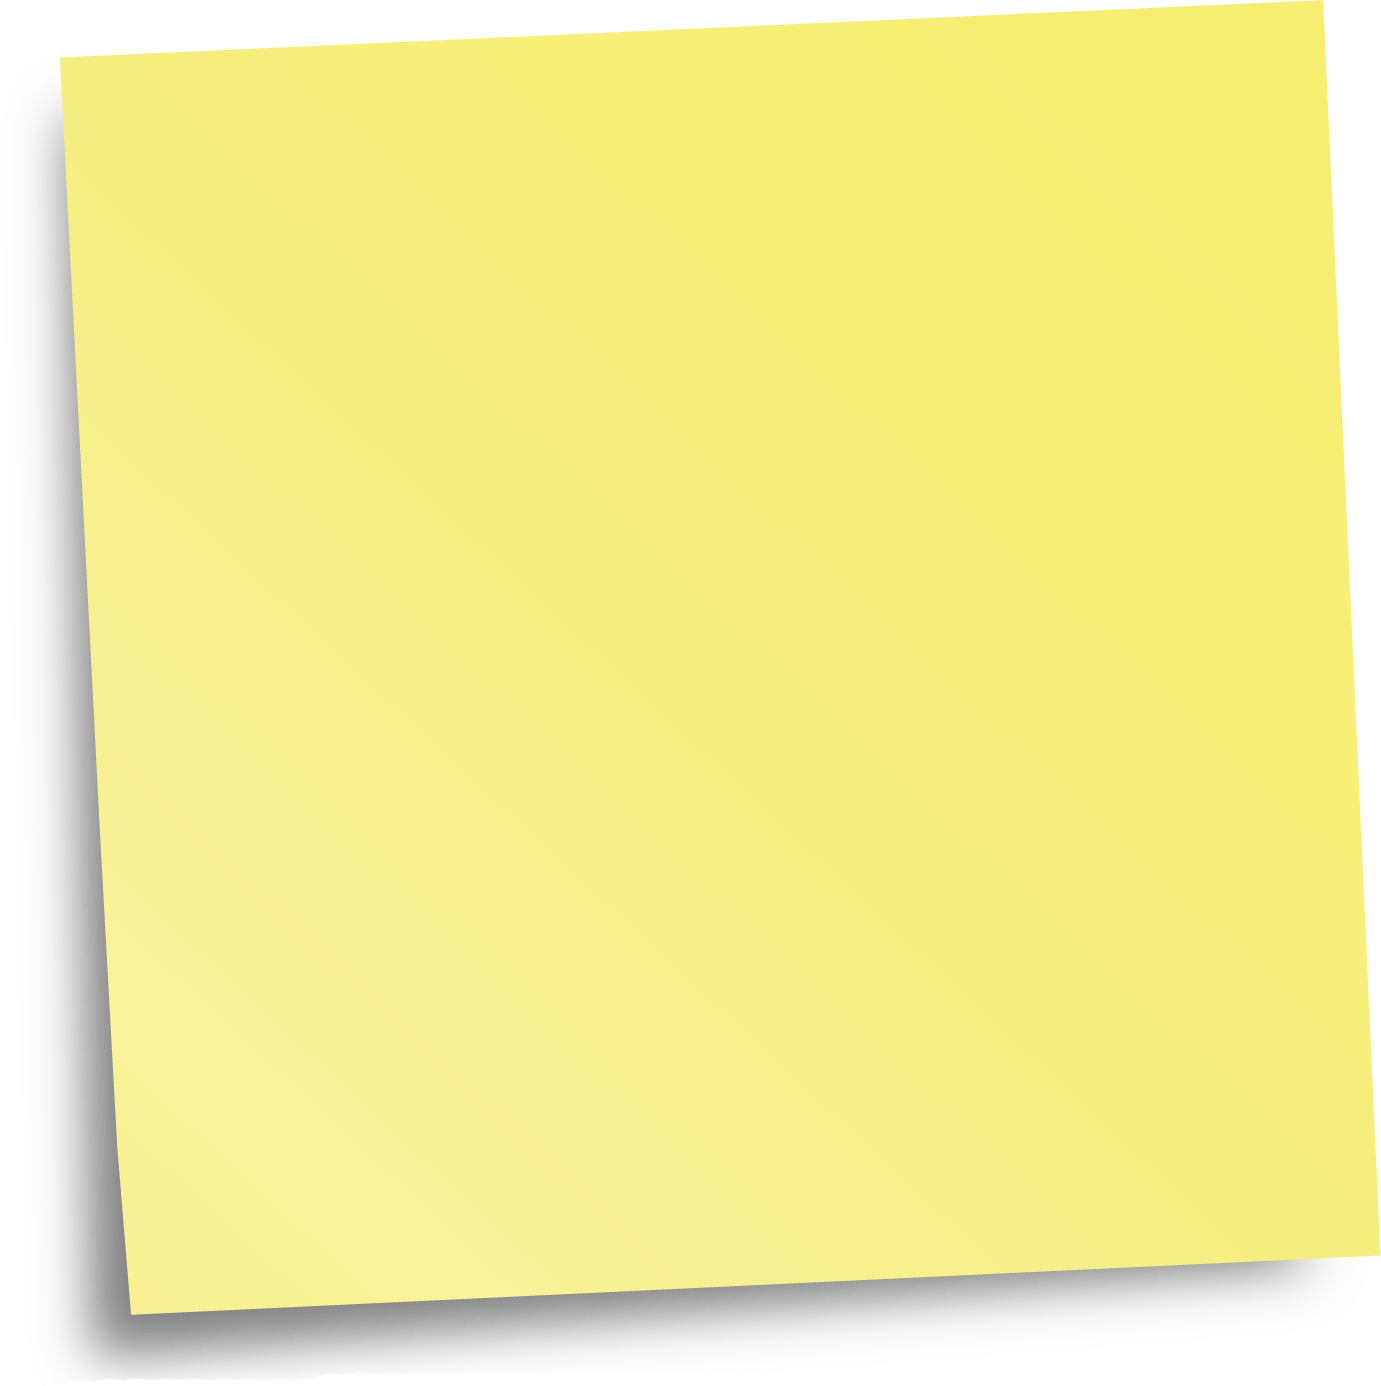 Sticy Notes PNG Image